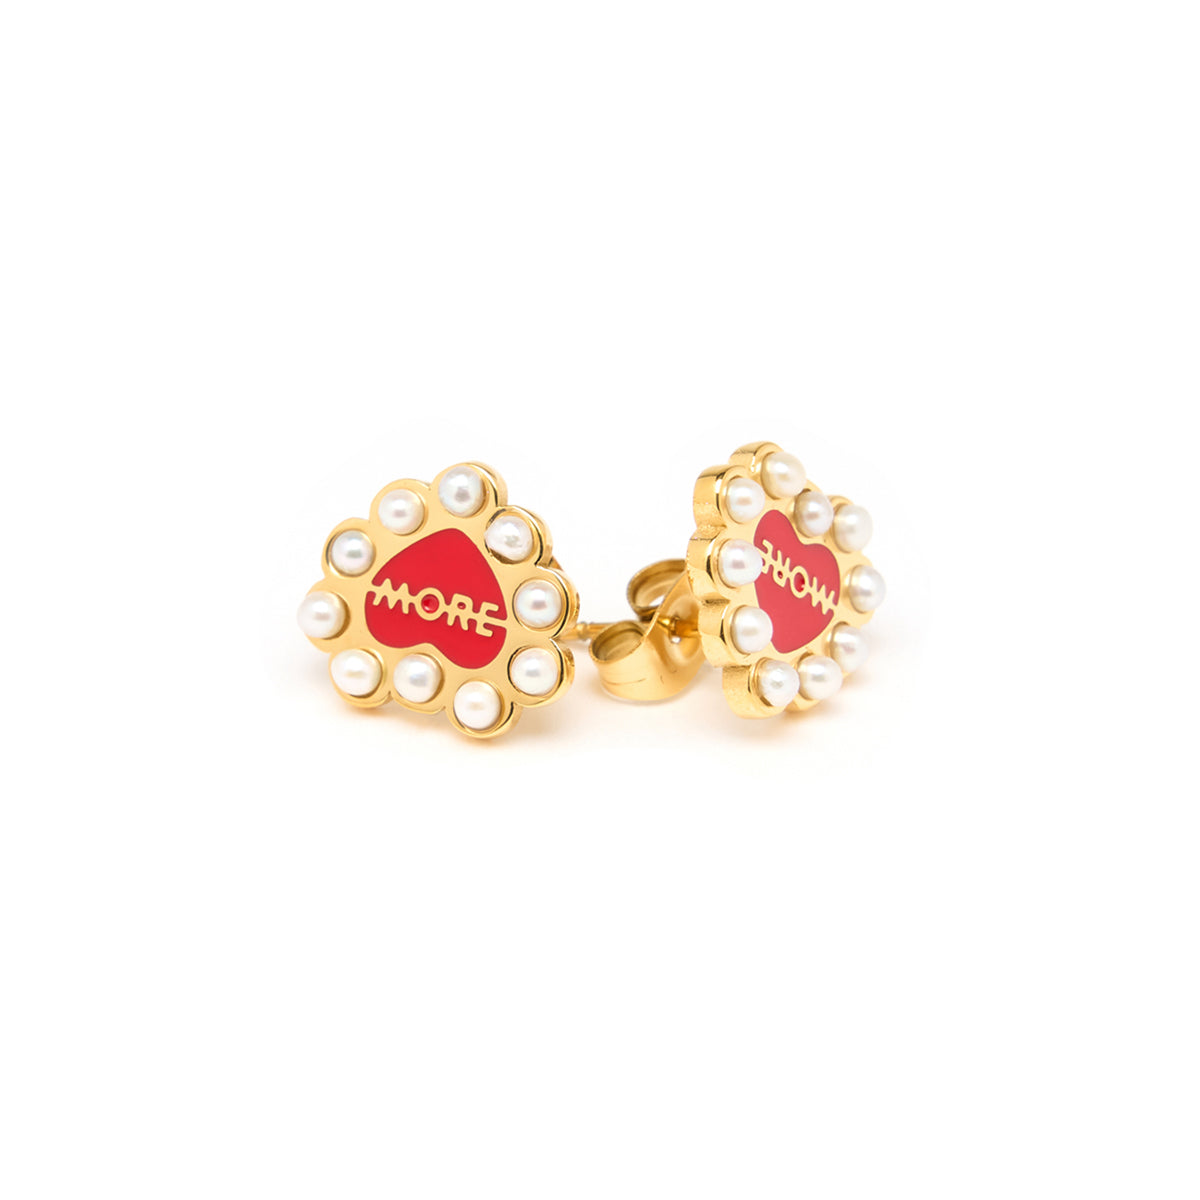 A-MORE - Red stud earrings with pearls